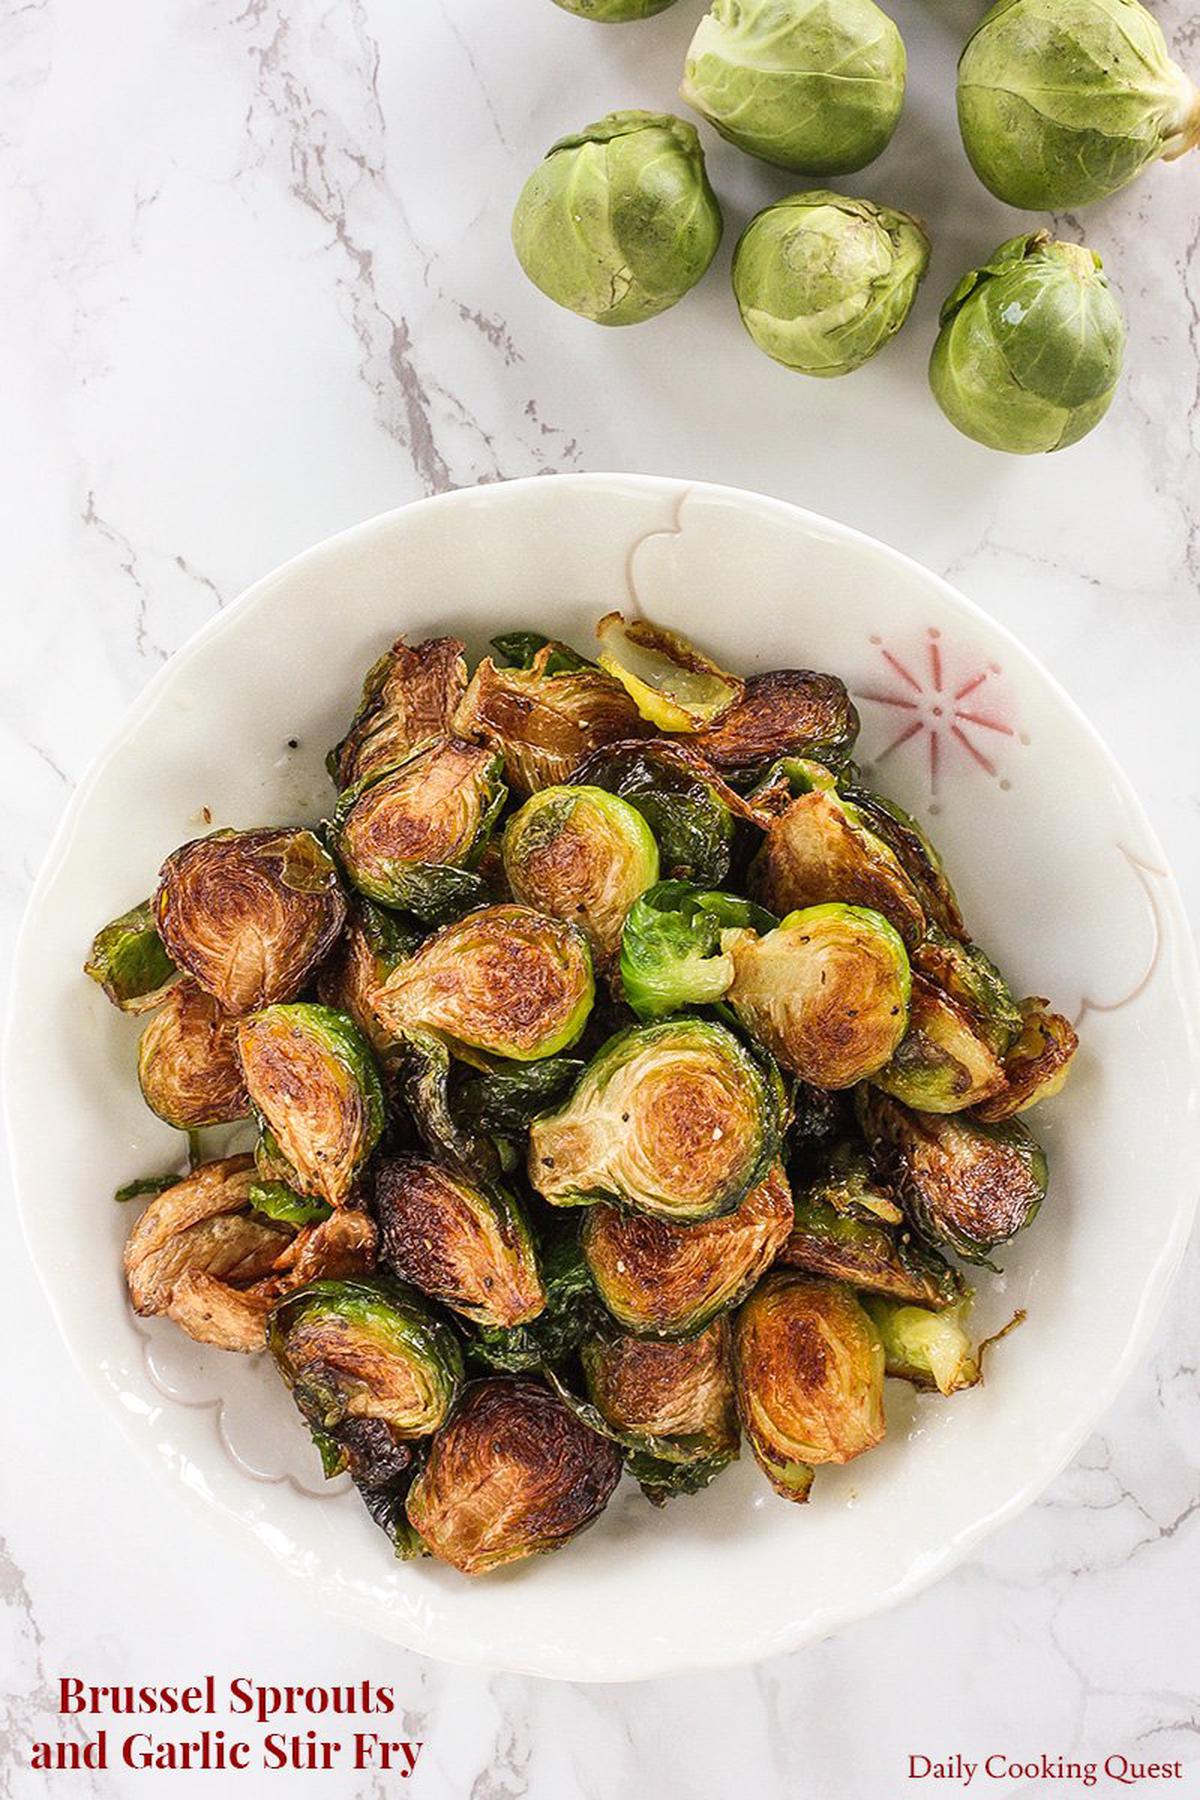 Brussels Sprouts and Garlic Stir Fry